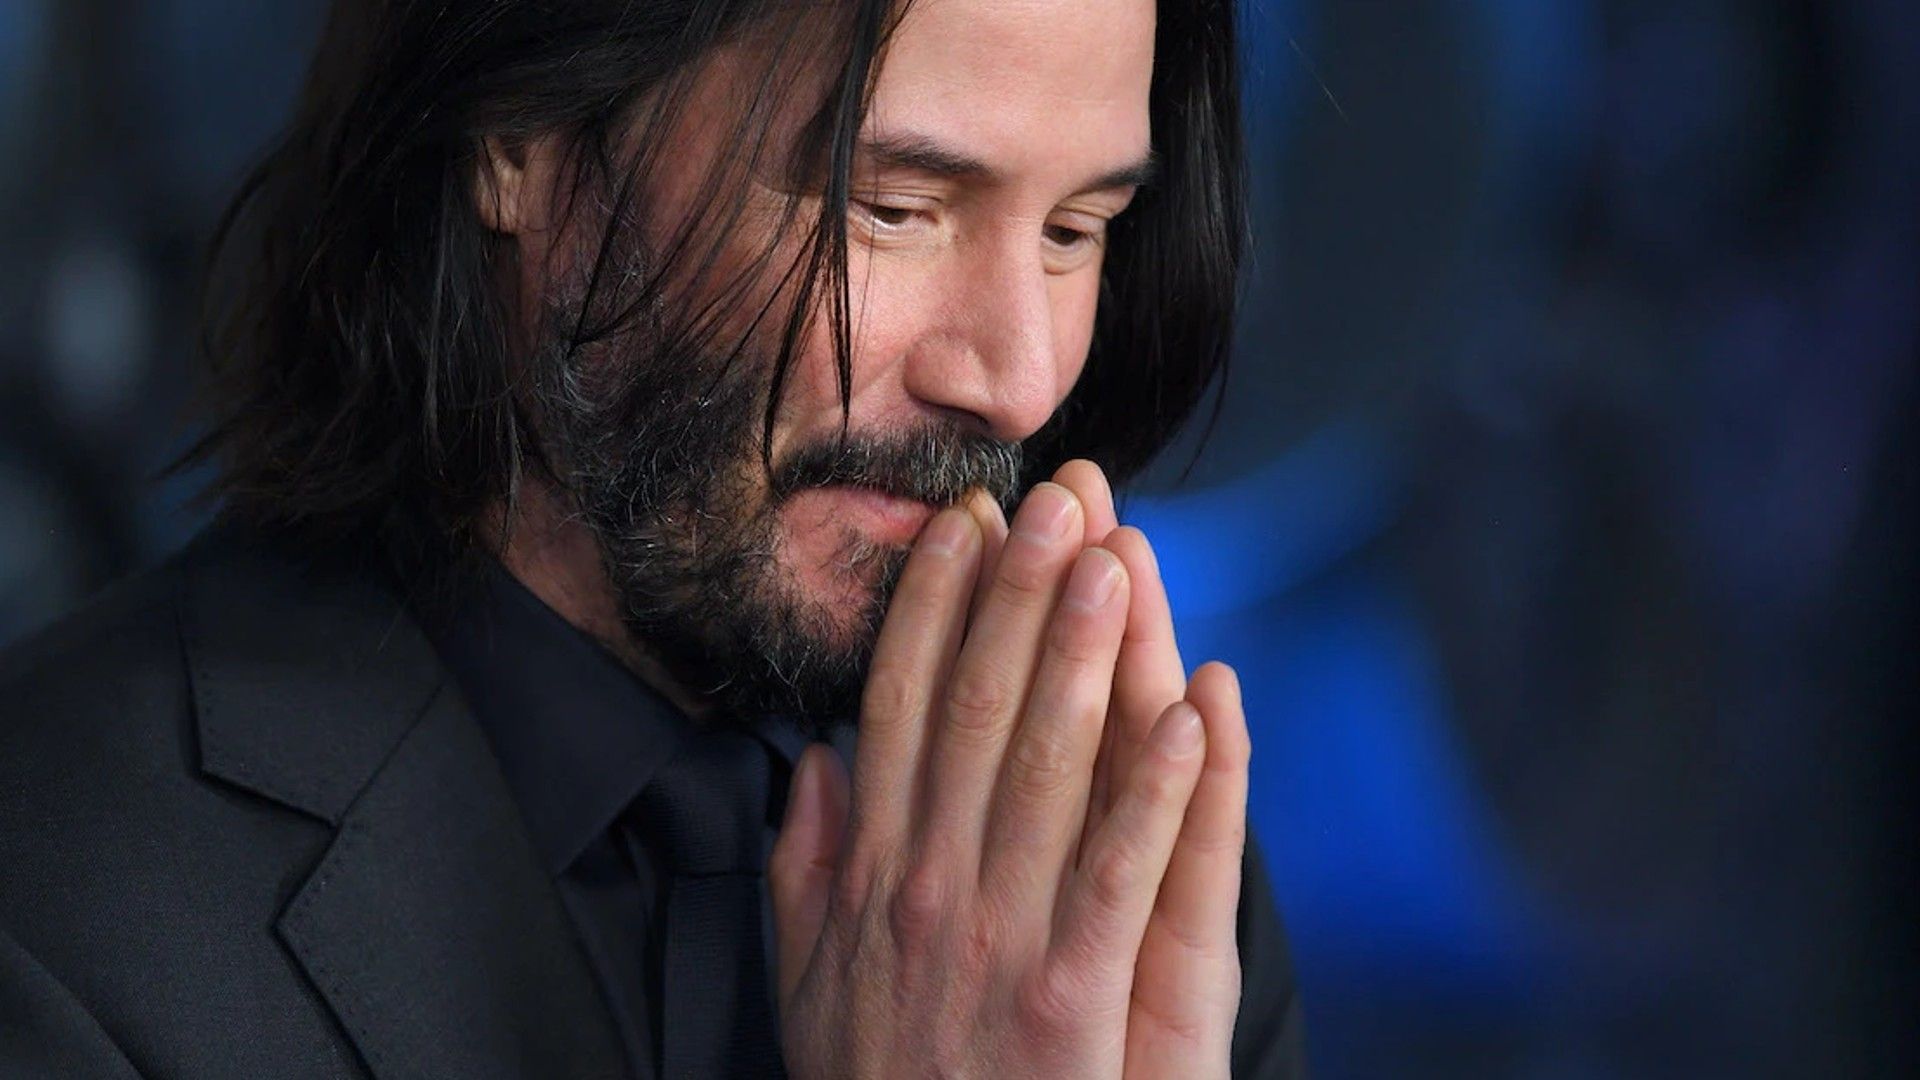 Keanu Reeves knows how to properly praise others